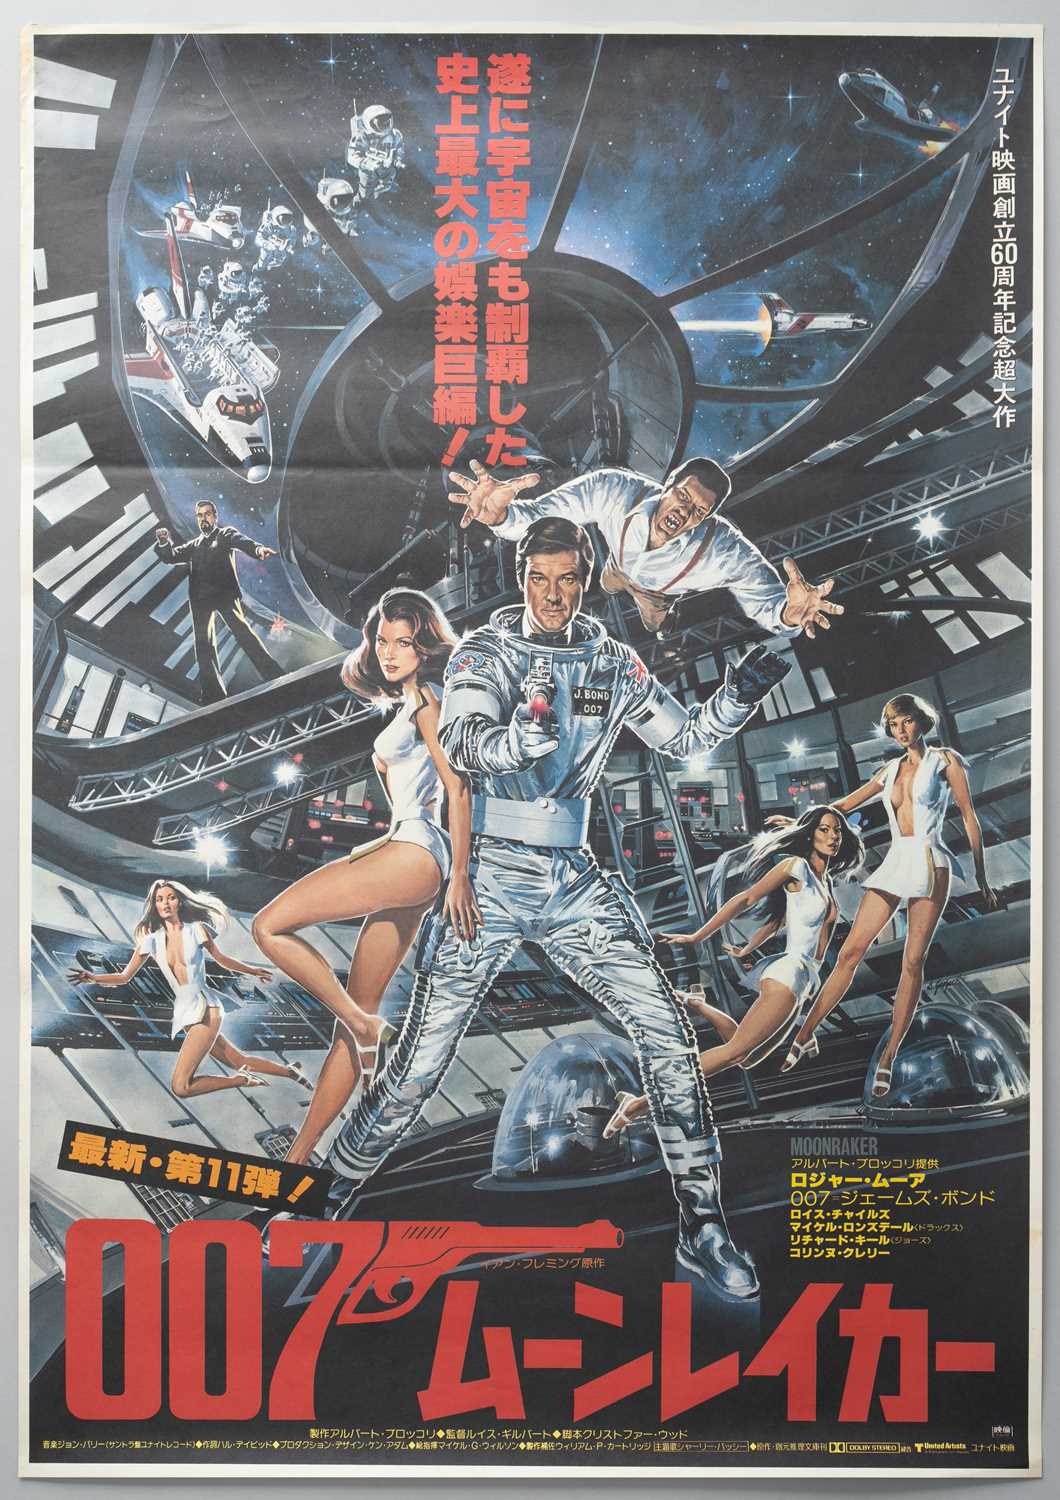 NO RESERVE A JAPANESE JAMES BOND 007 POSTER SHOWA ERA, 1979 Featuring Roger Moore in Moonraker (